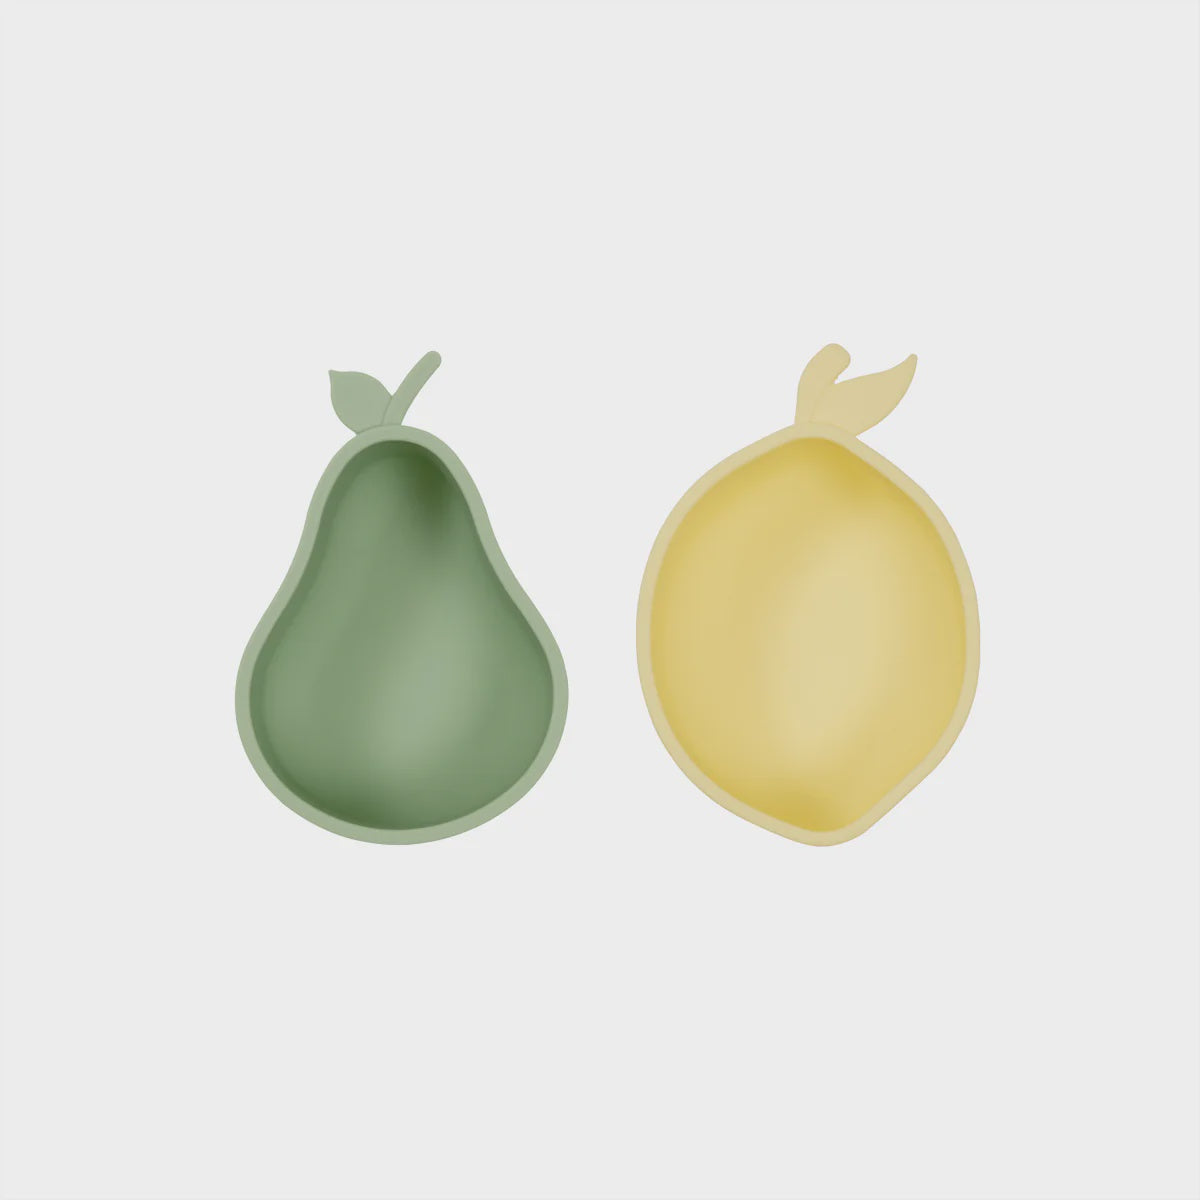 Snack Bowl Set of 2 - Lemon and Pear